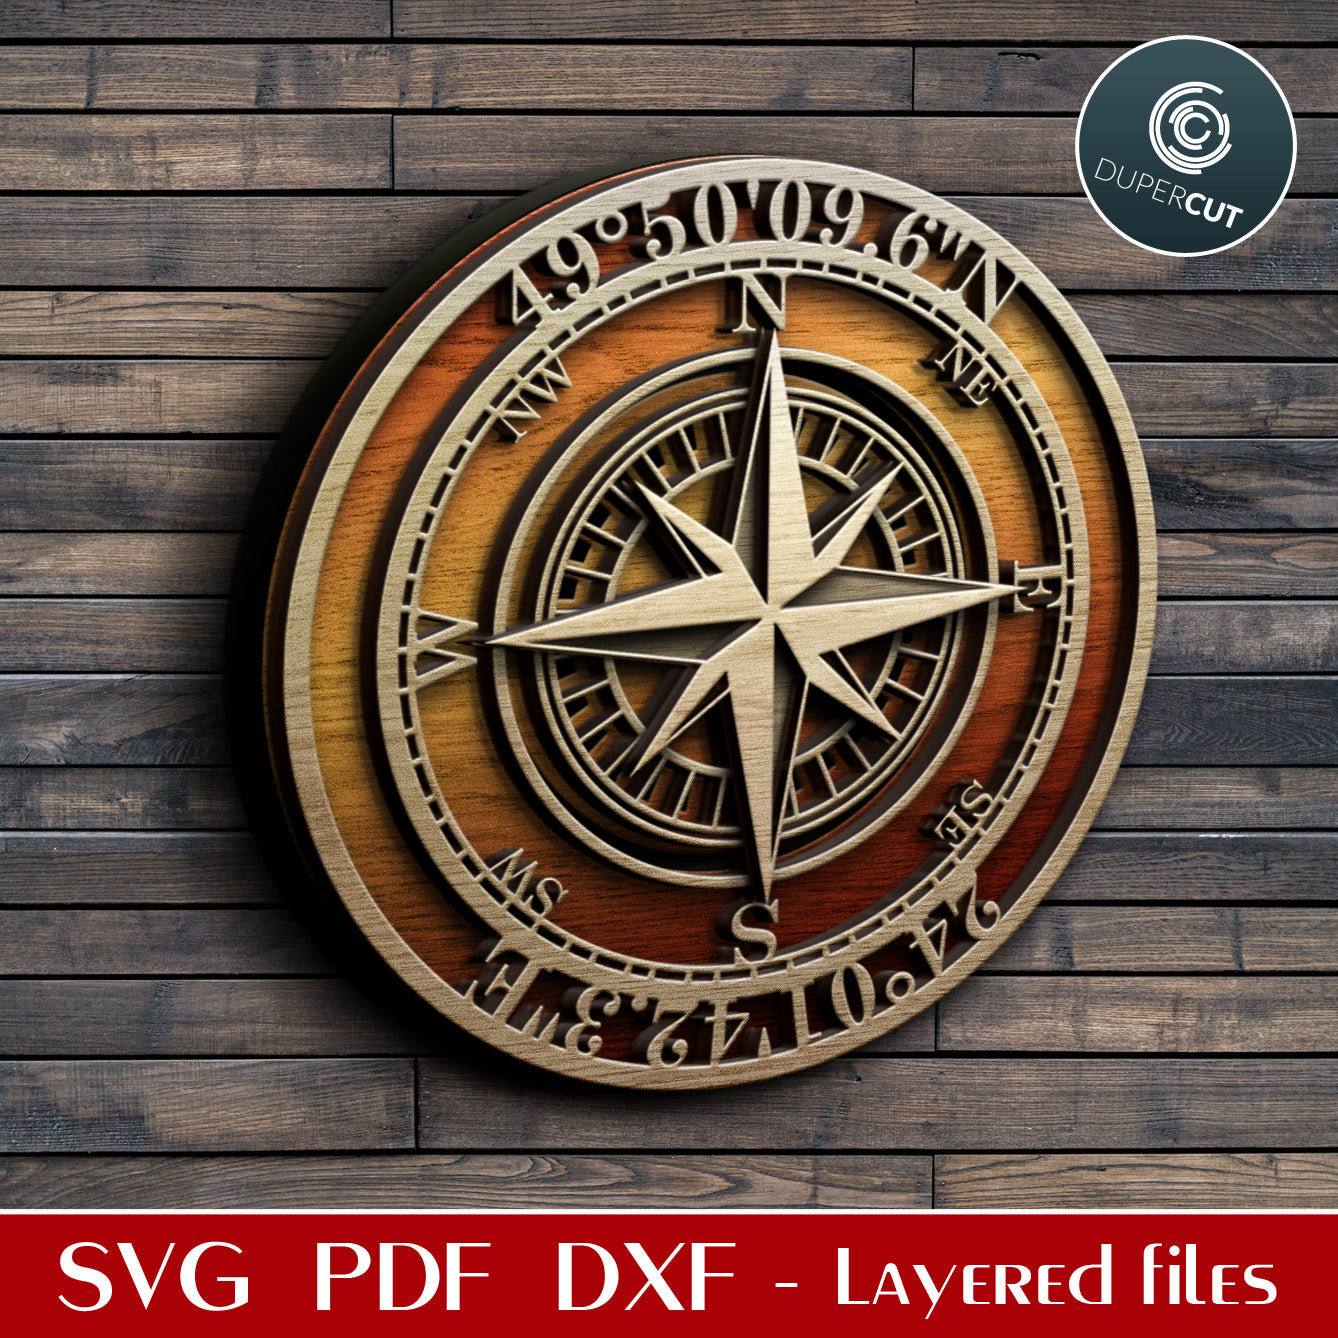 Compass laser cutting files - personalized template with editable text - SVG PDF DXF vector files for Cricut, Silhouette Cameo, Glowforge, CNC plasma machines